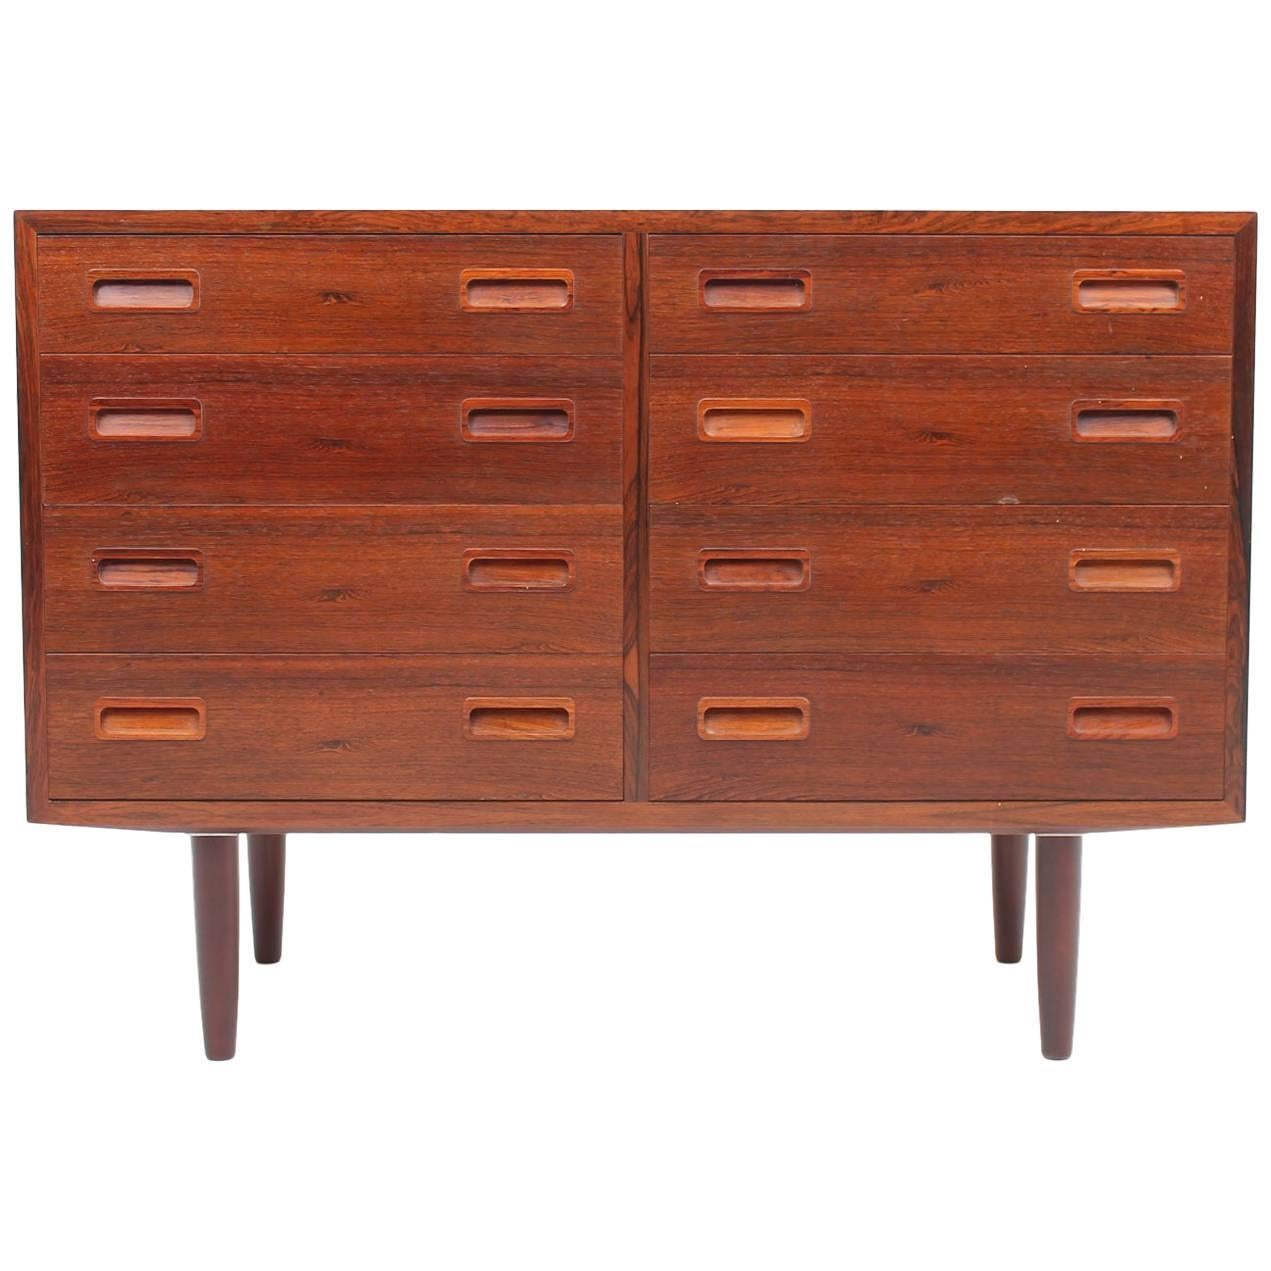 Rosewood Double Chest of Drawers by Poul Hundevad, Scandinavian Modern For Sale